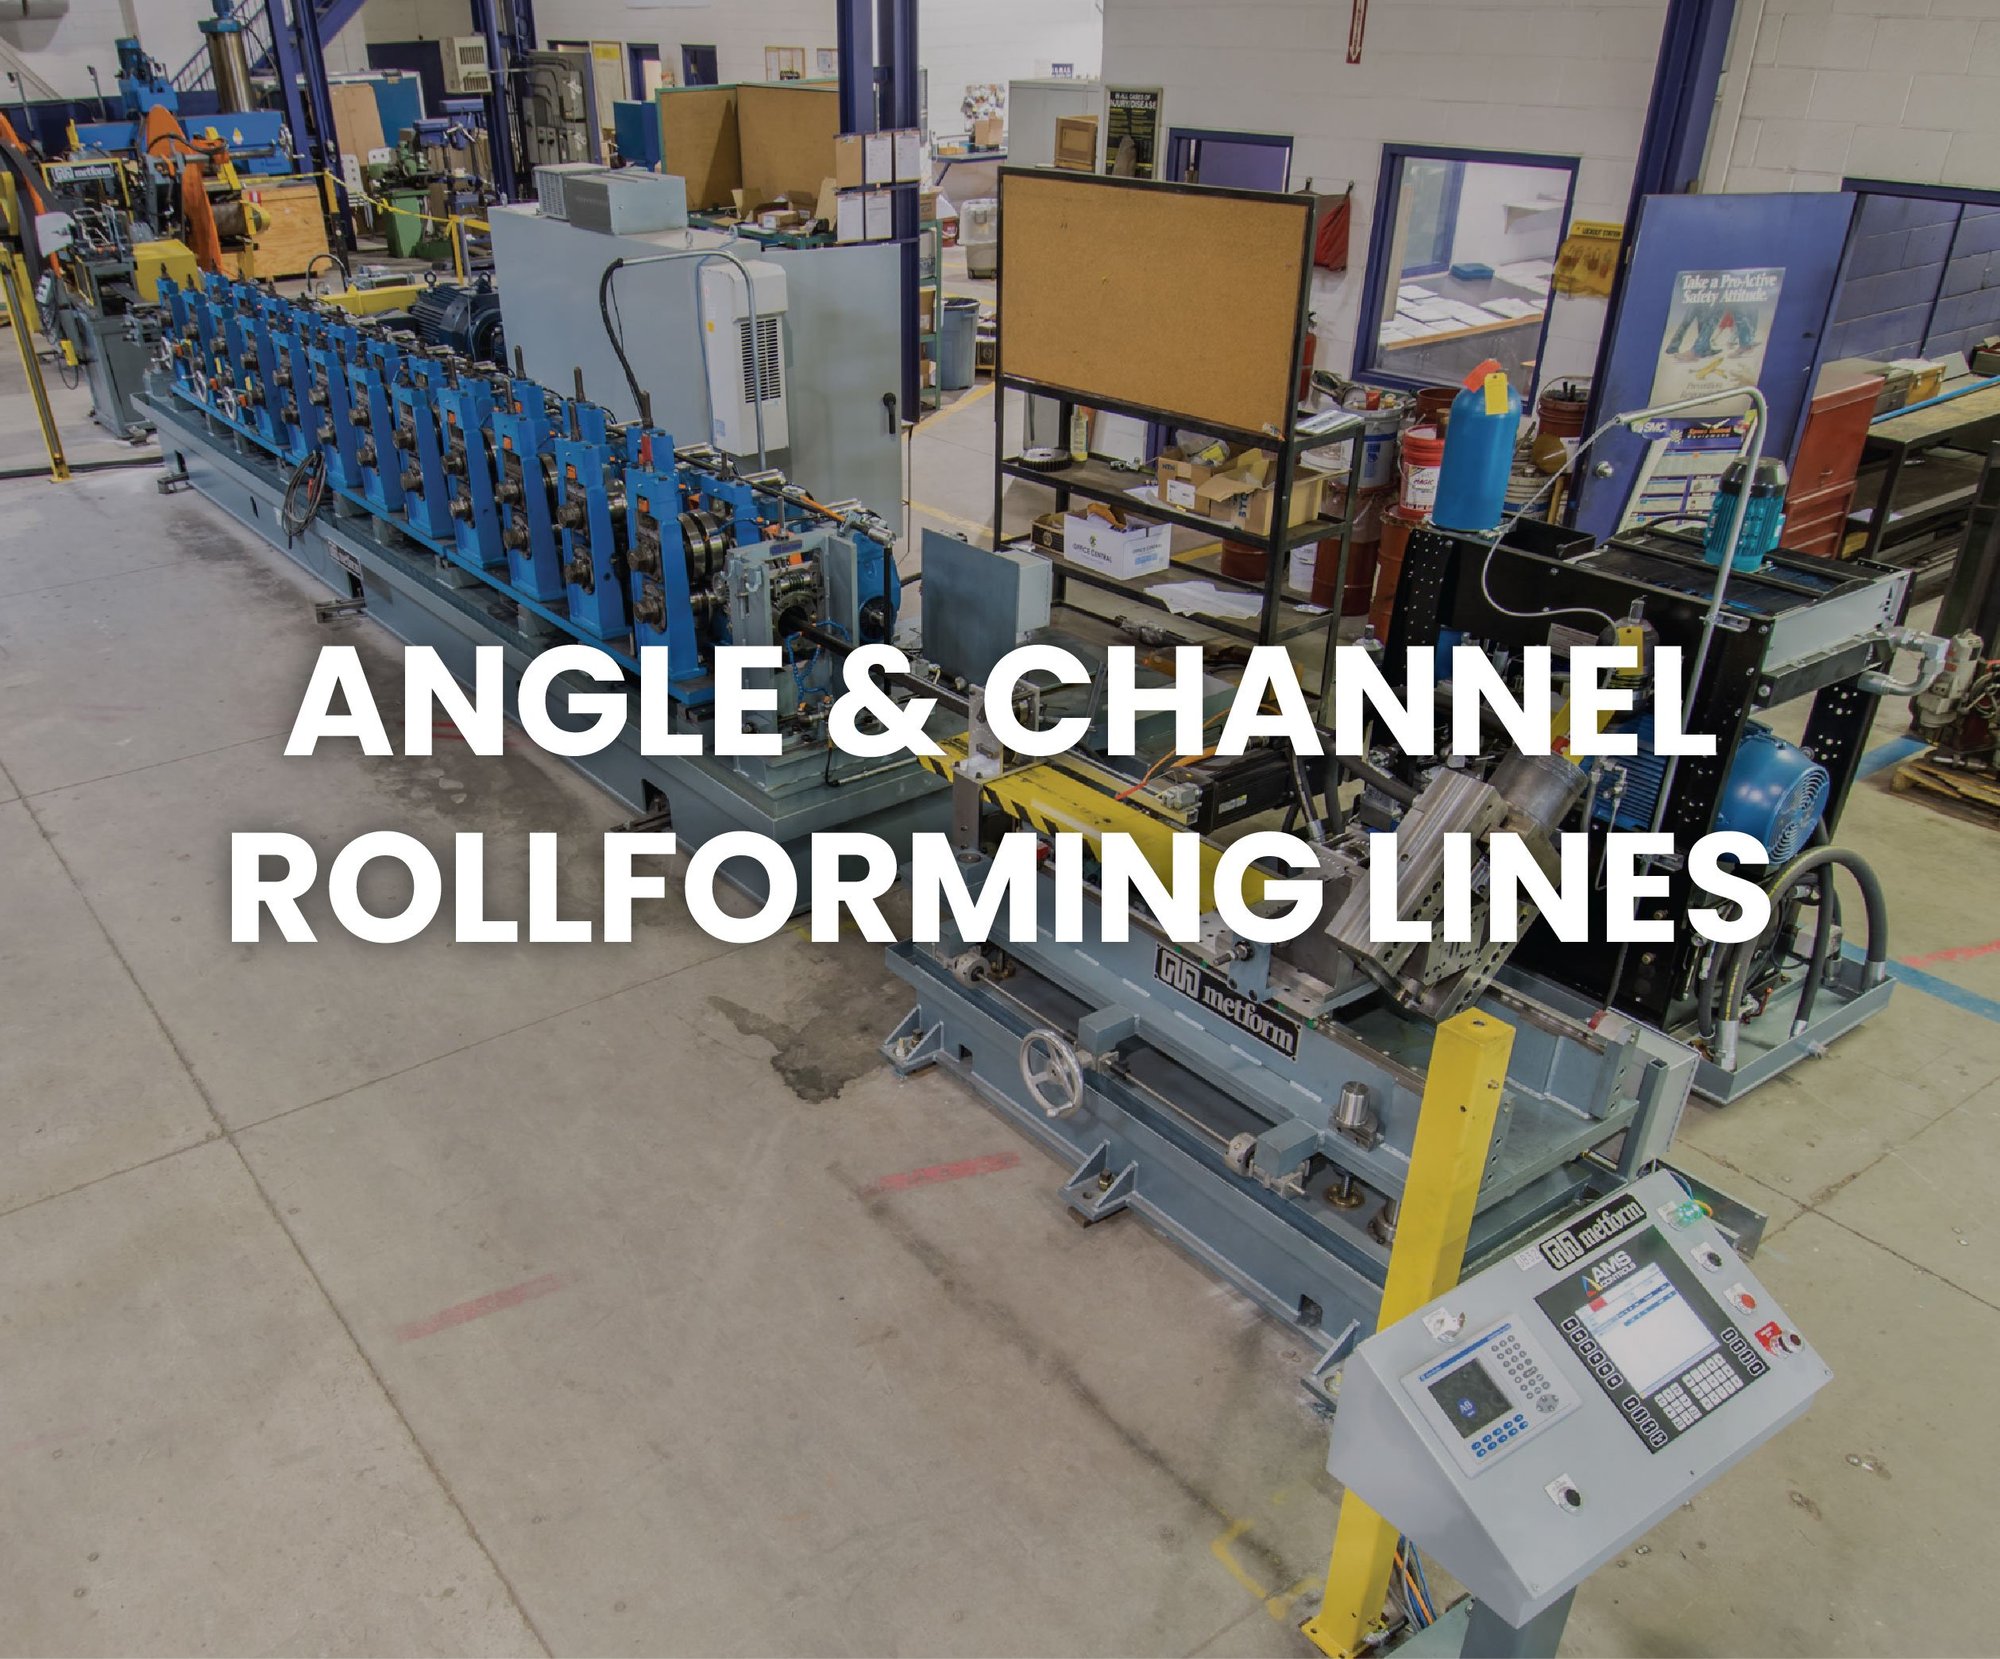 Angle & Channel RollForming Lines